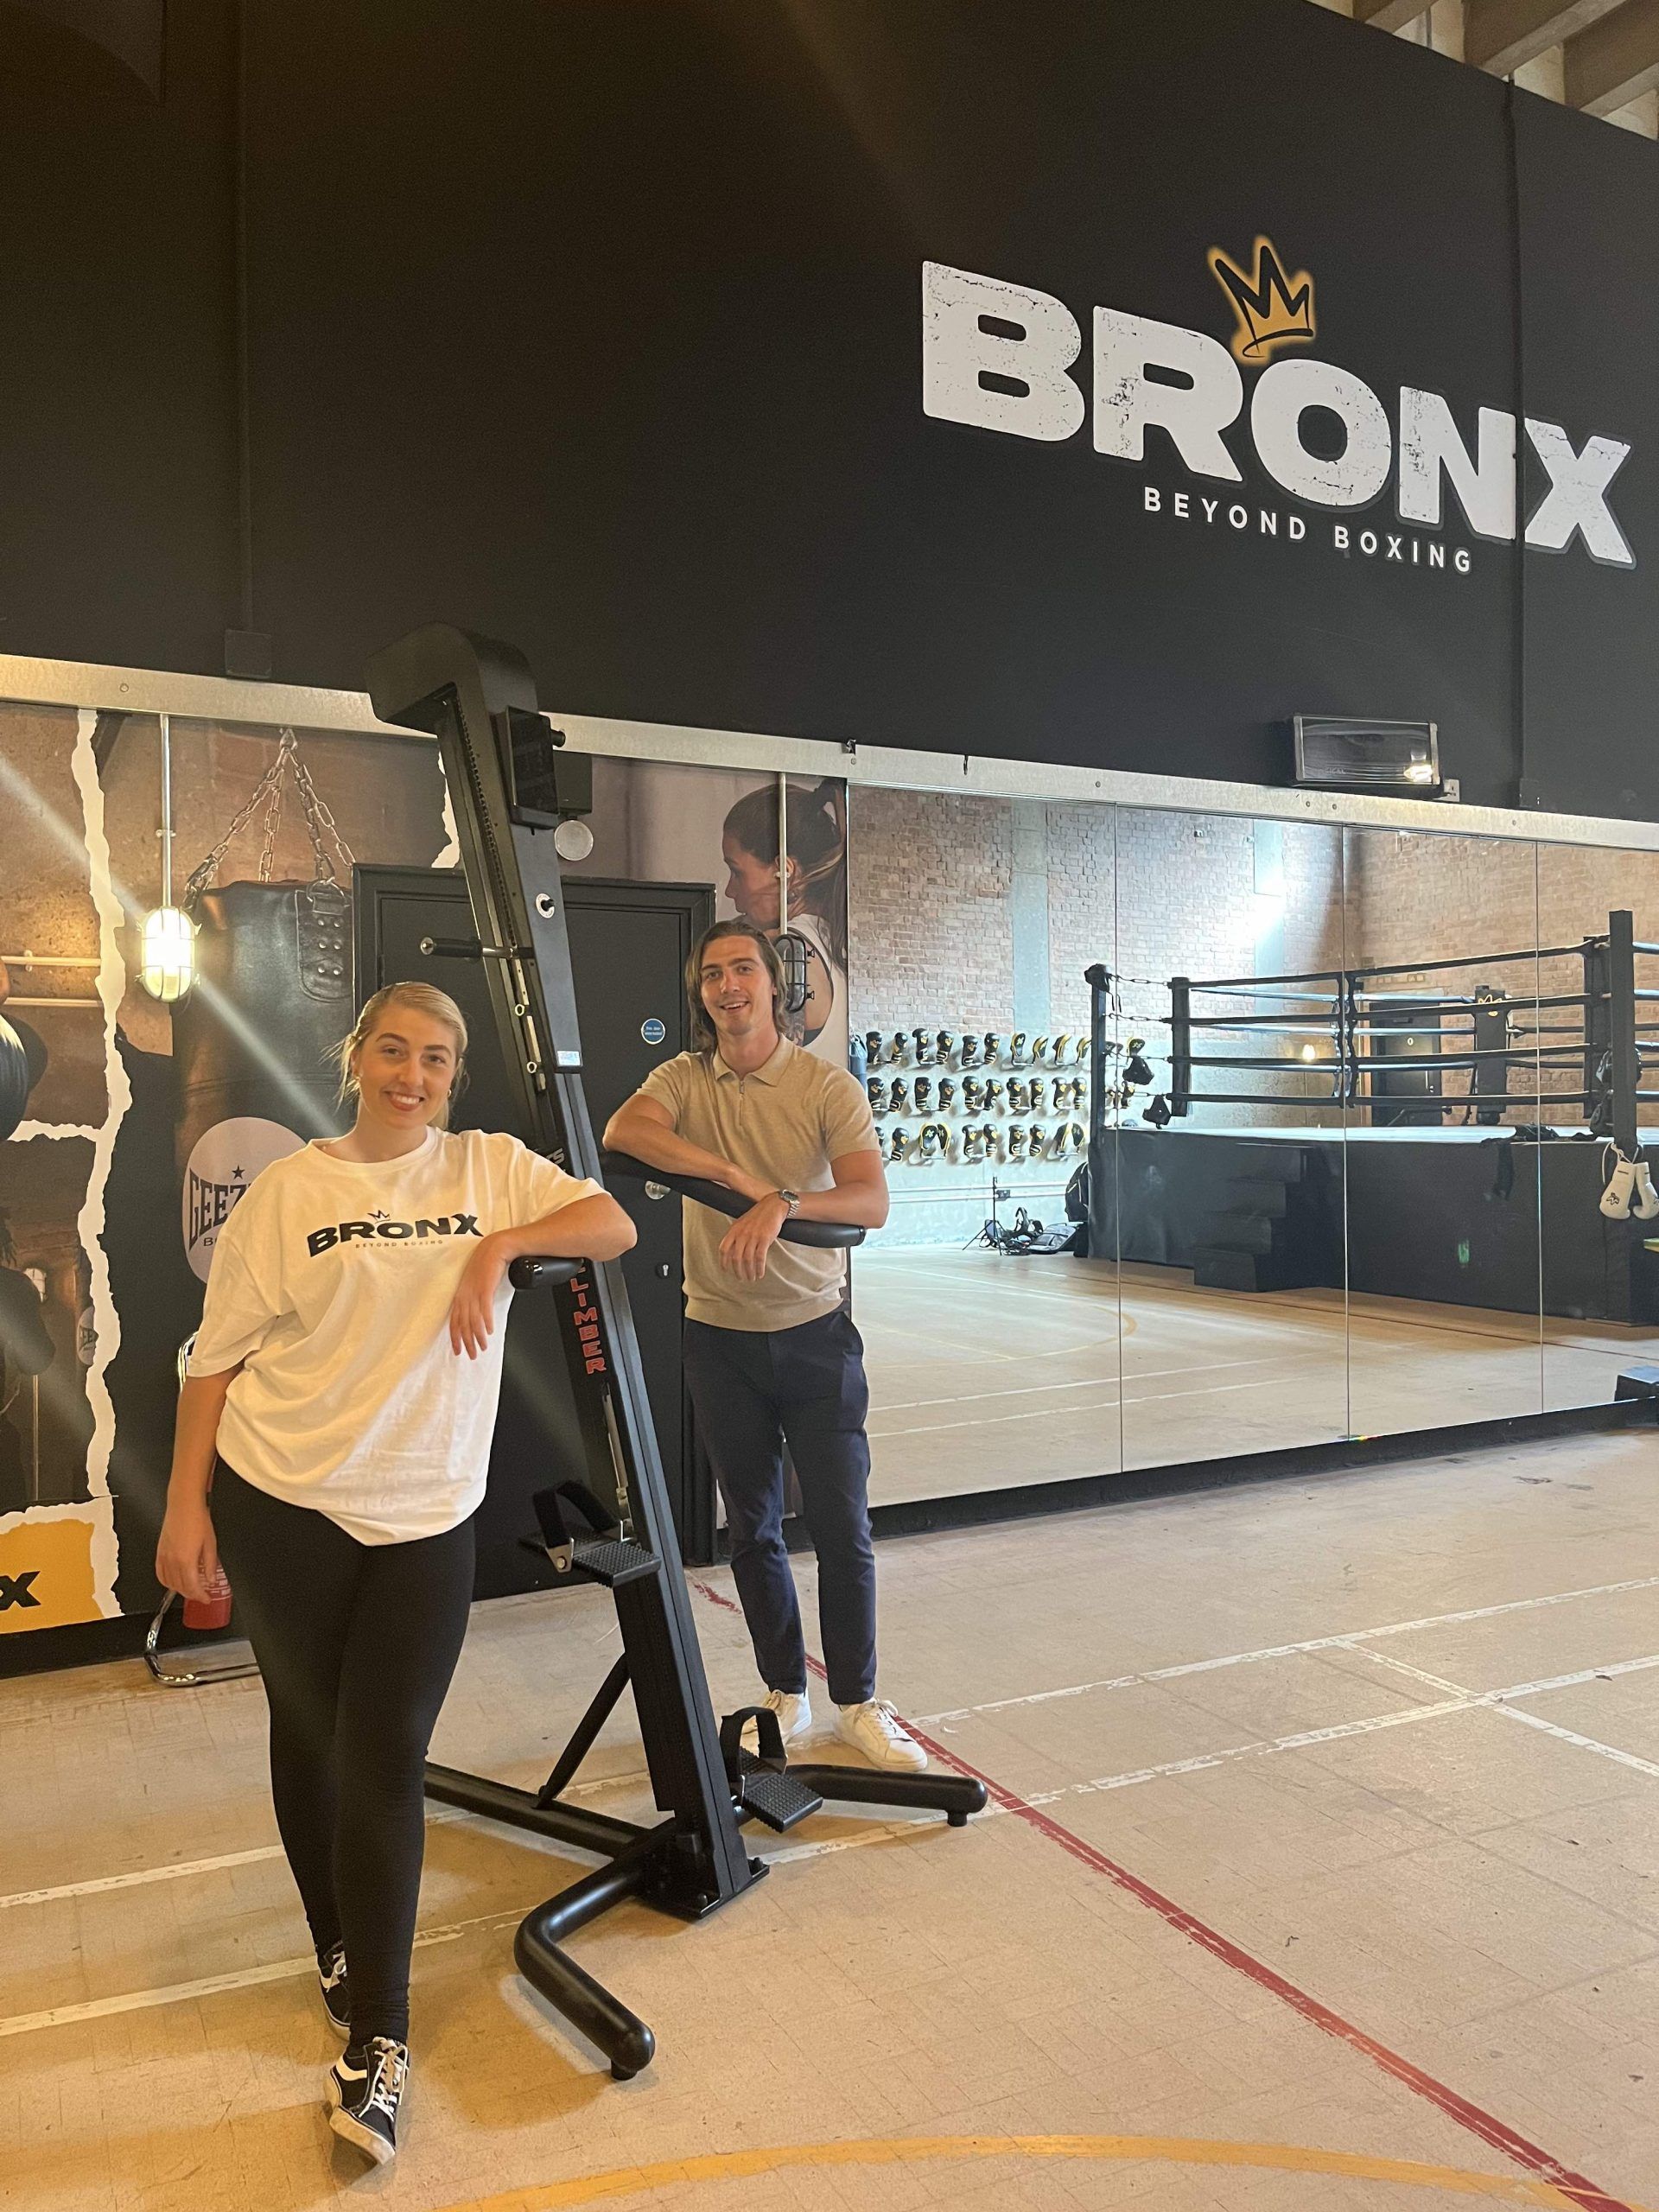 <p>An interview with The Apprentice winner Marnie Swindells: Her partnership with Versaclimber, life after TV and plans to change the boxing world</p>
